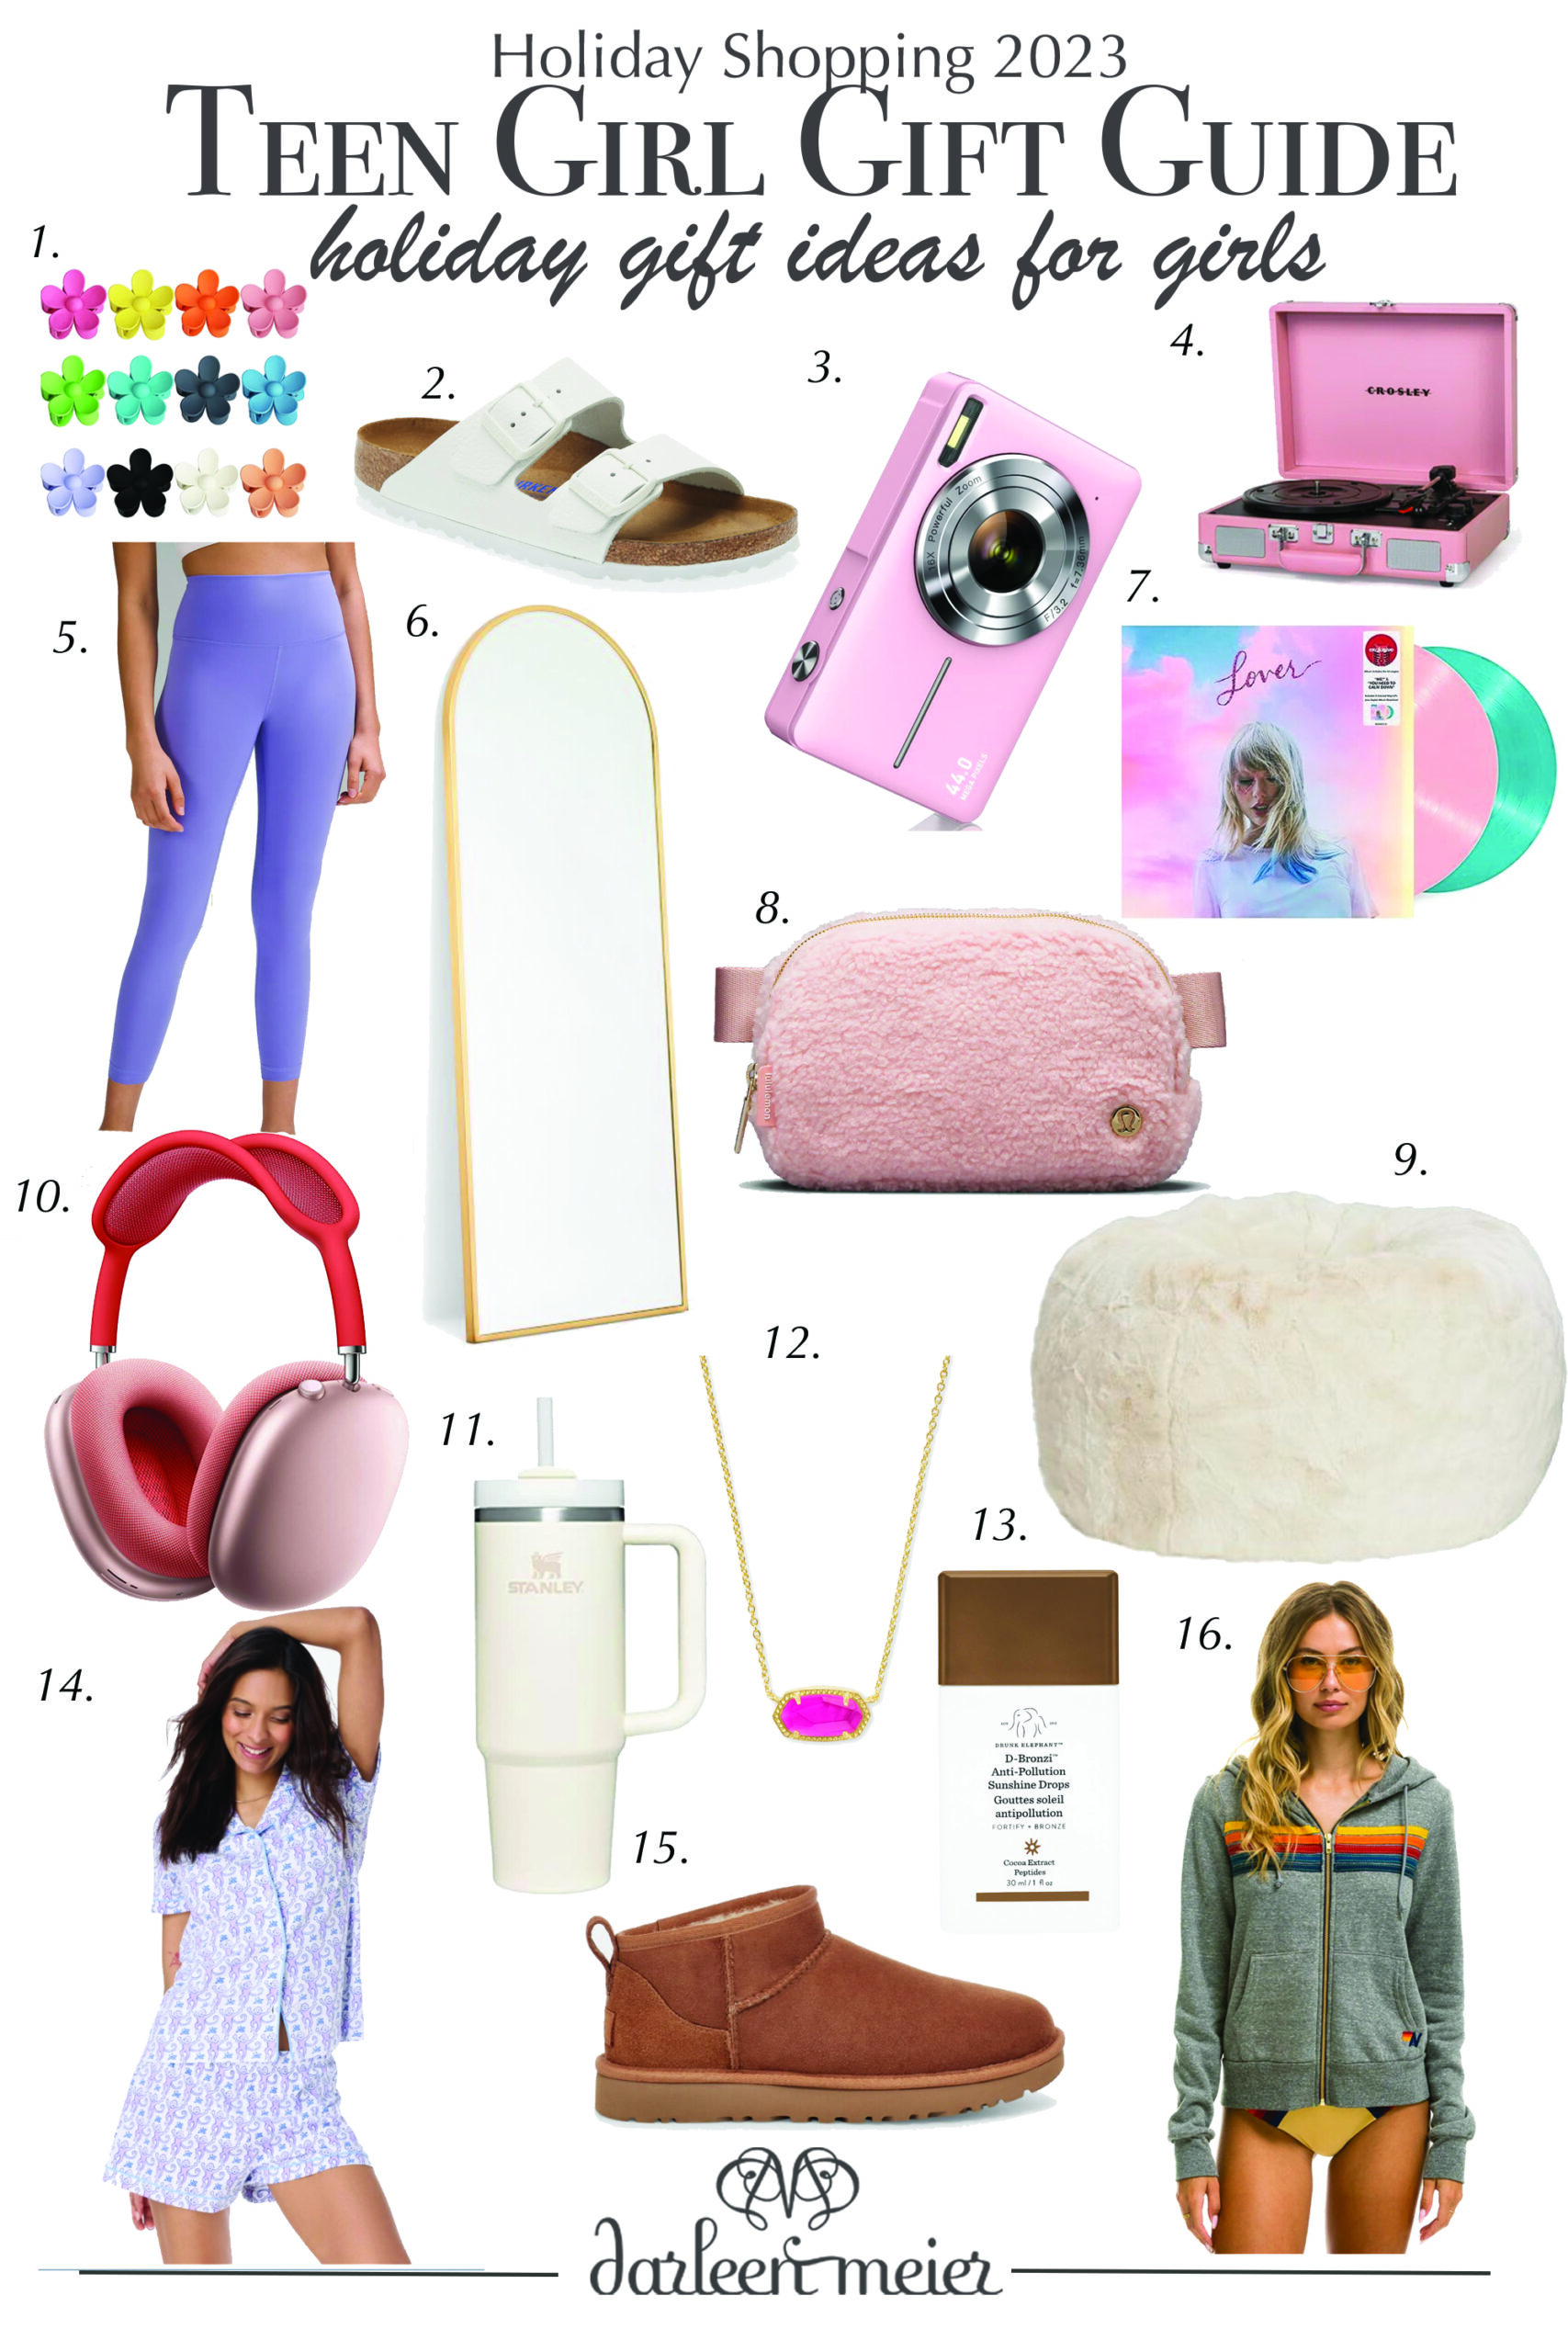 Rules for Shopping with Tween Girls